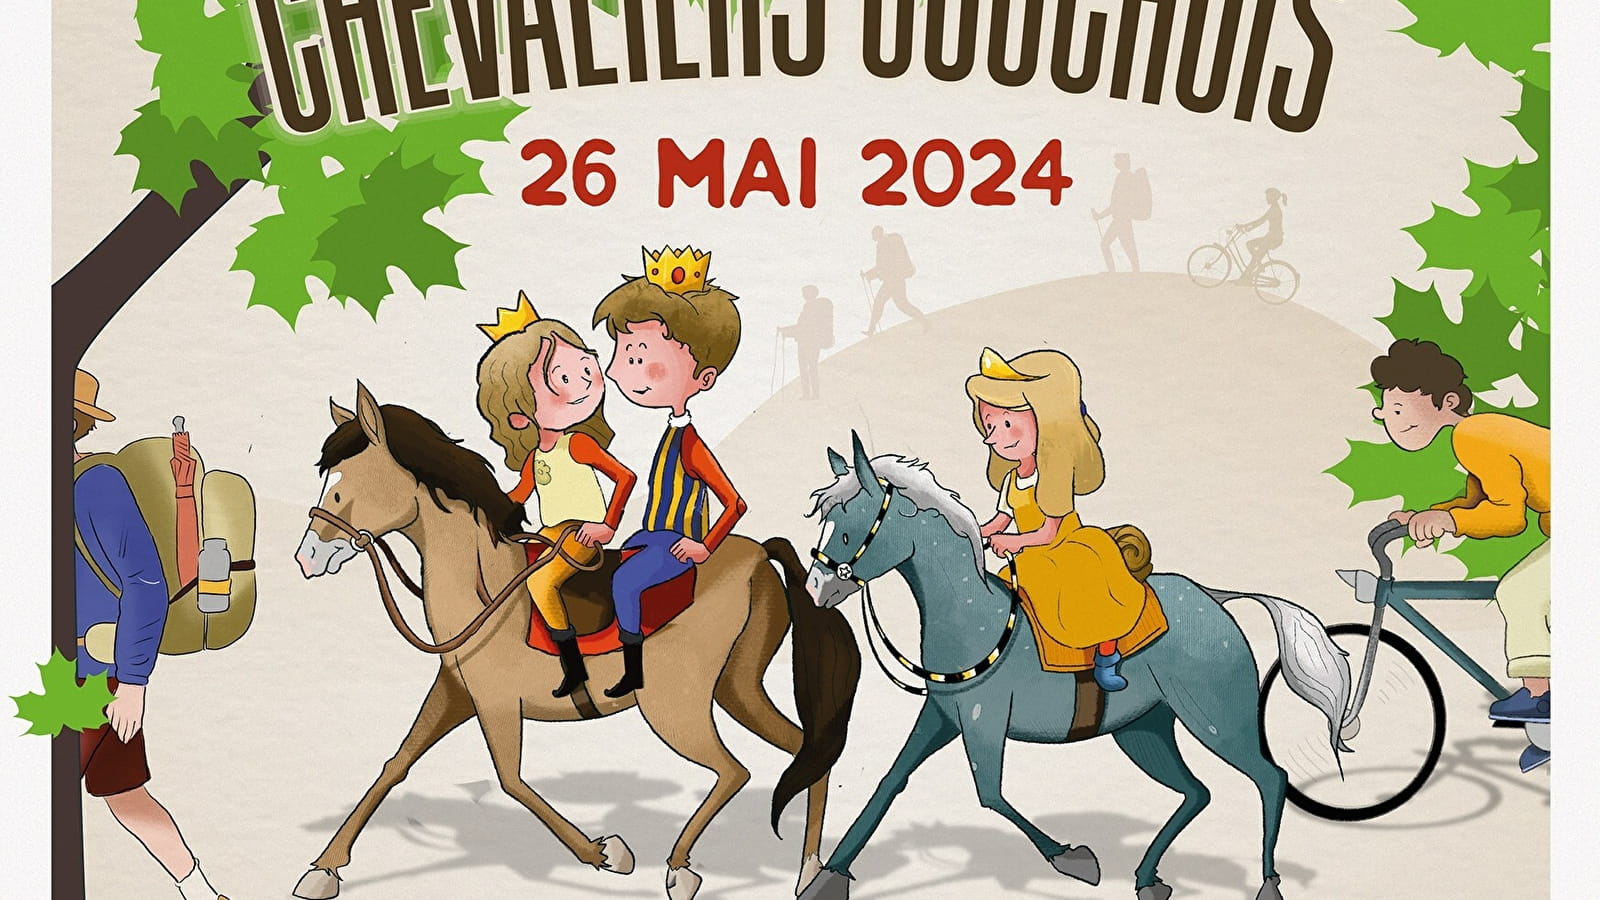 3 Petits Chevaliers Couchois wandeling